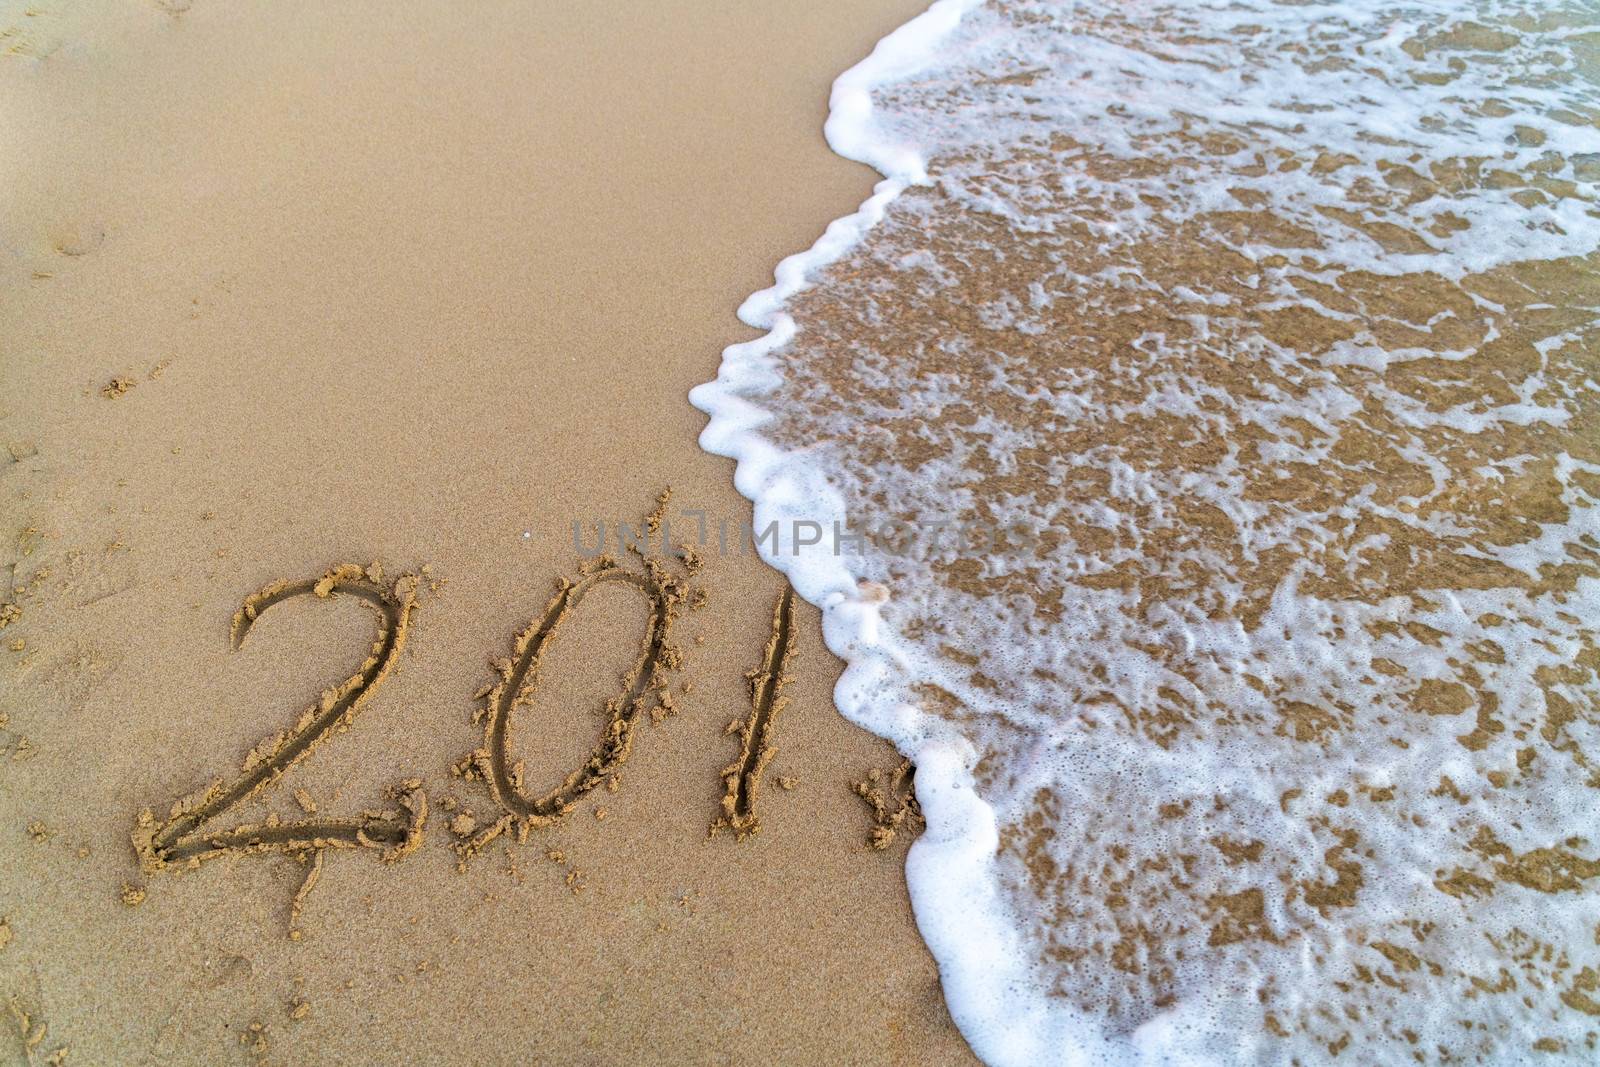 The 2018 written on the sand while the wave is cancelling the 8 symbolising the coming end of the year.